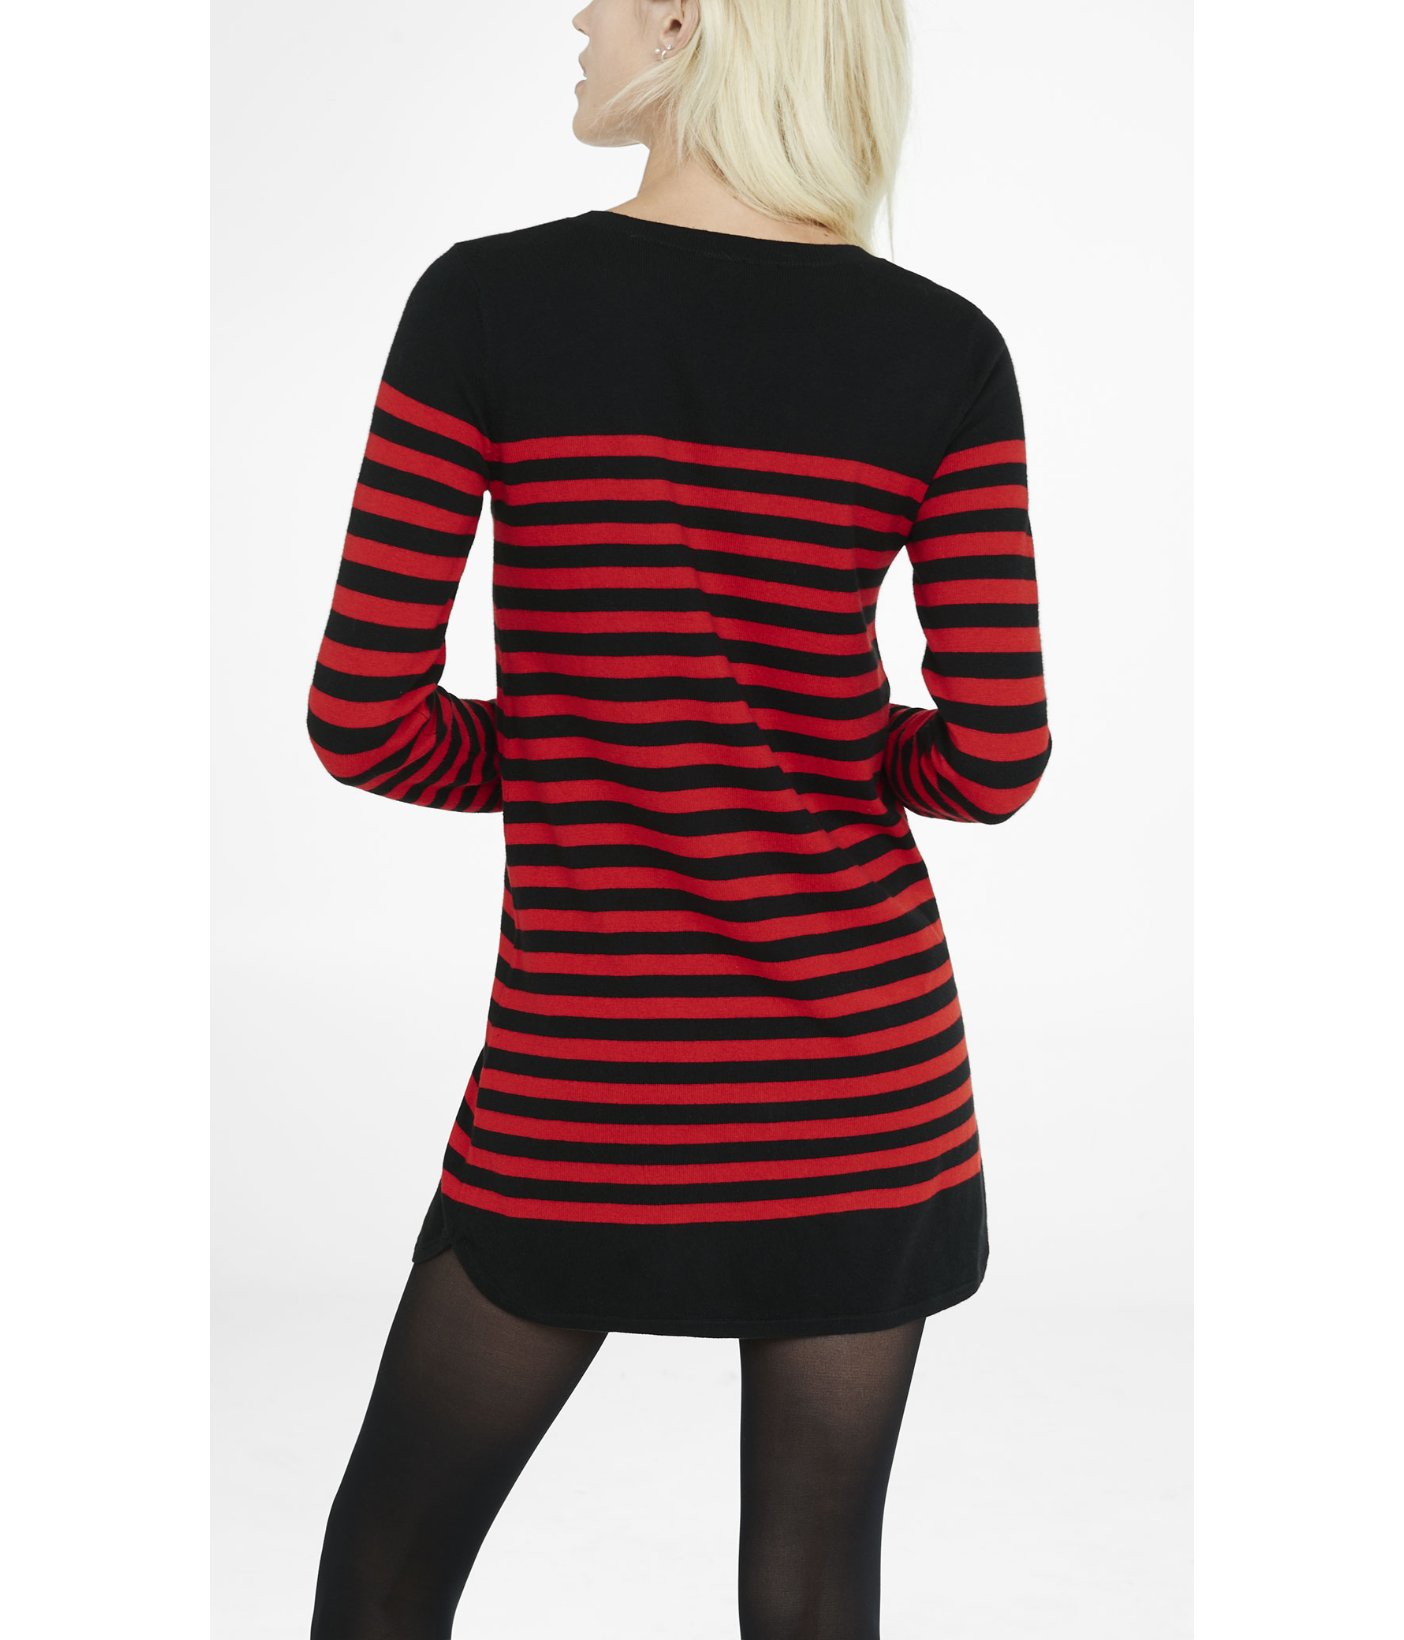 Express Black And Red Striped Sweater Dress in Black | Lyst